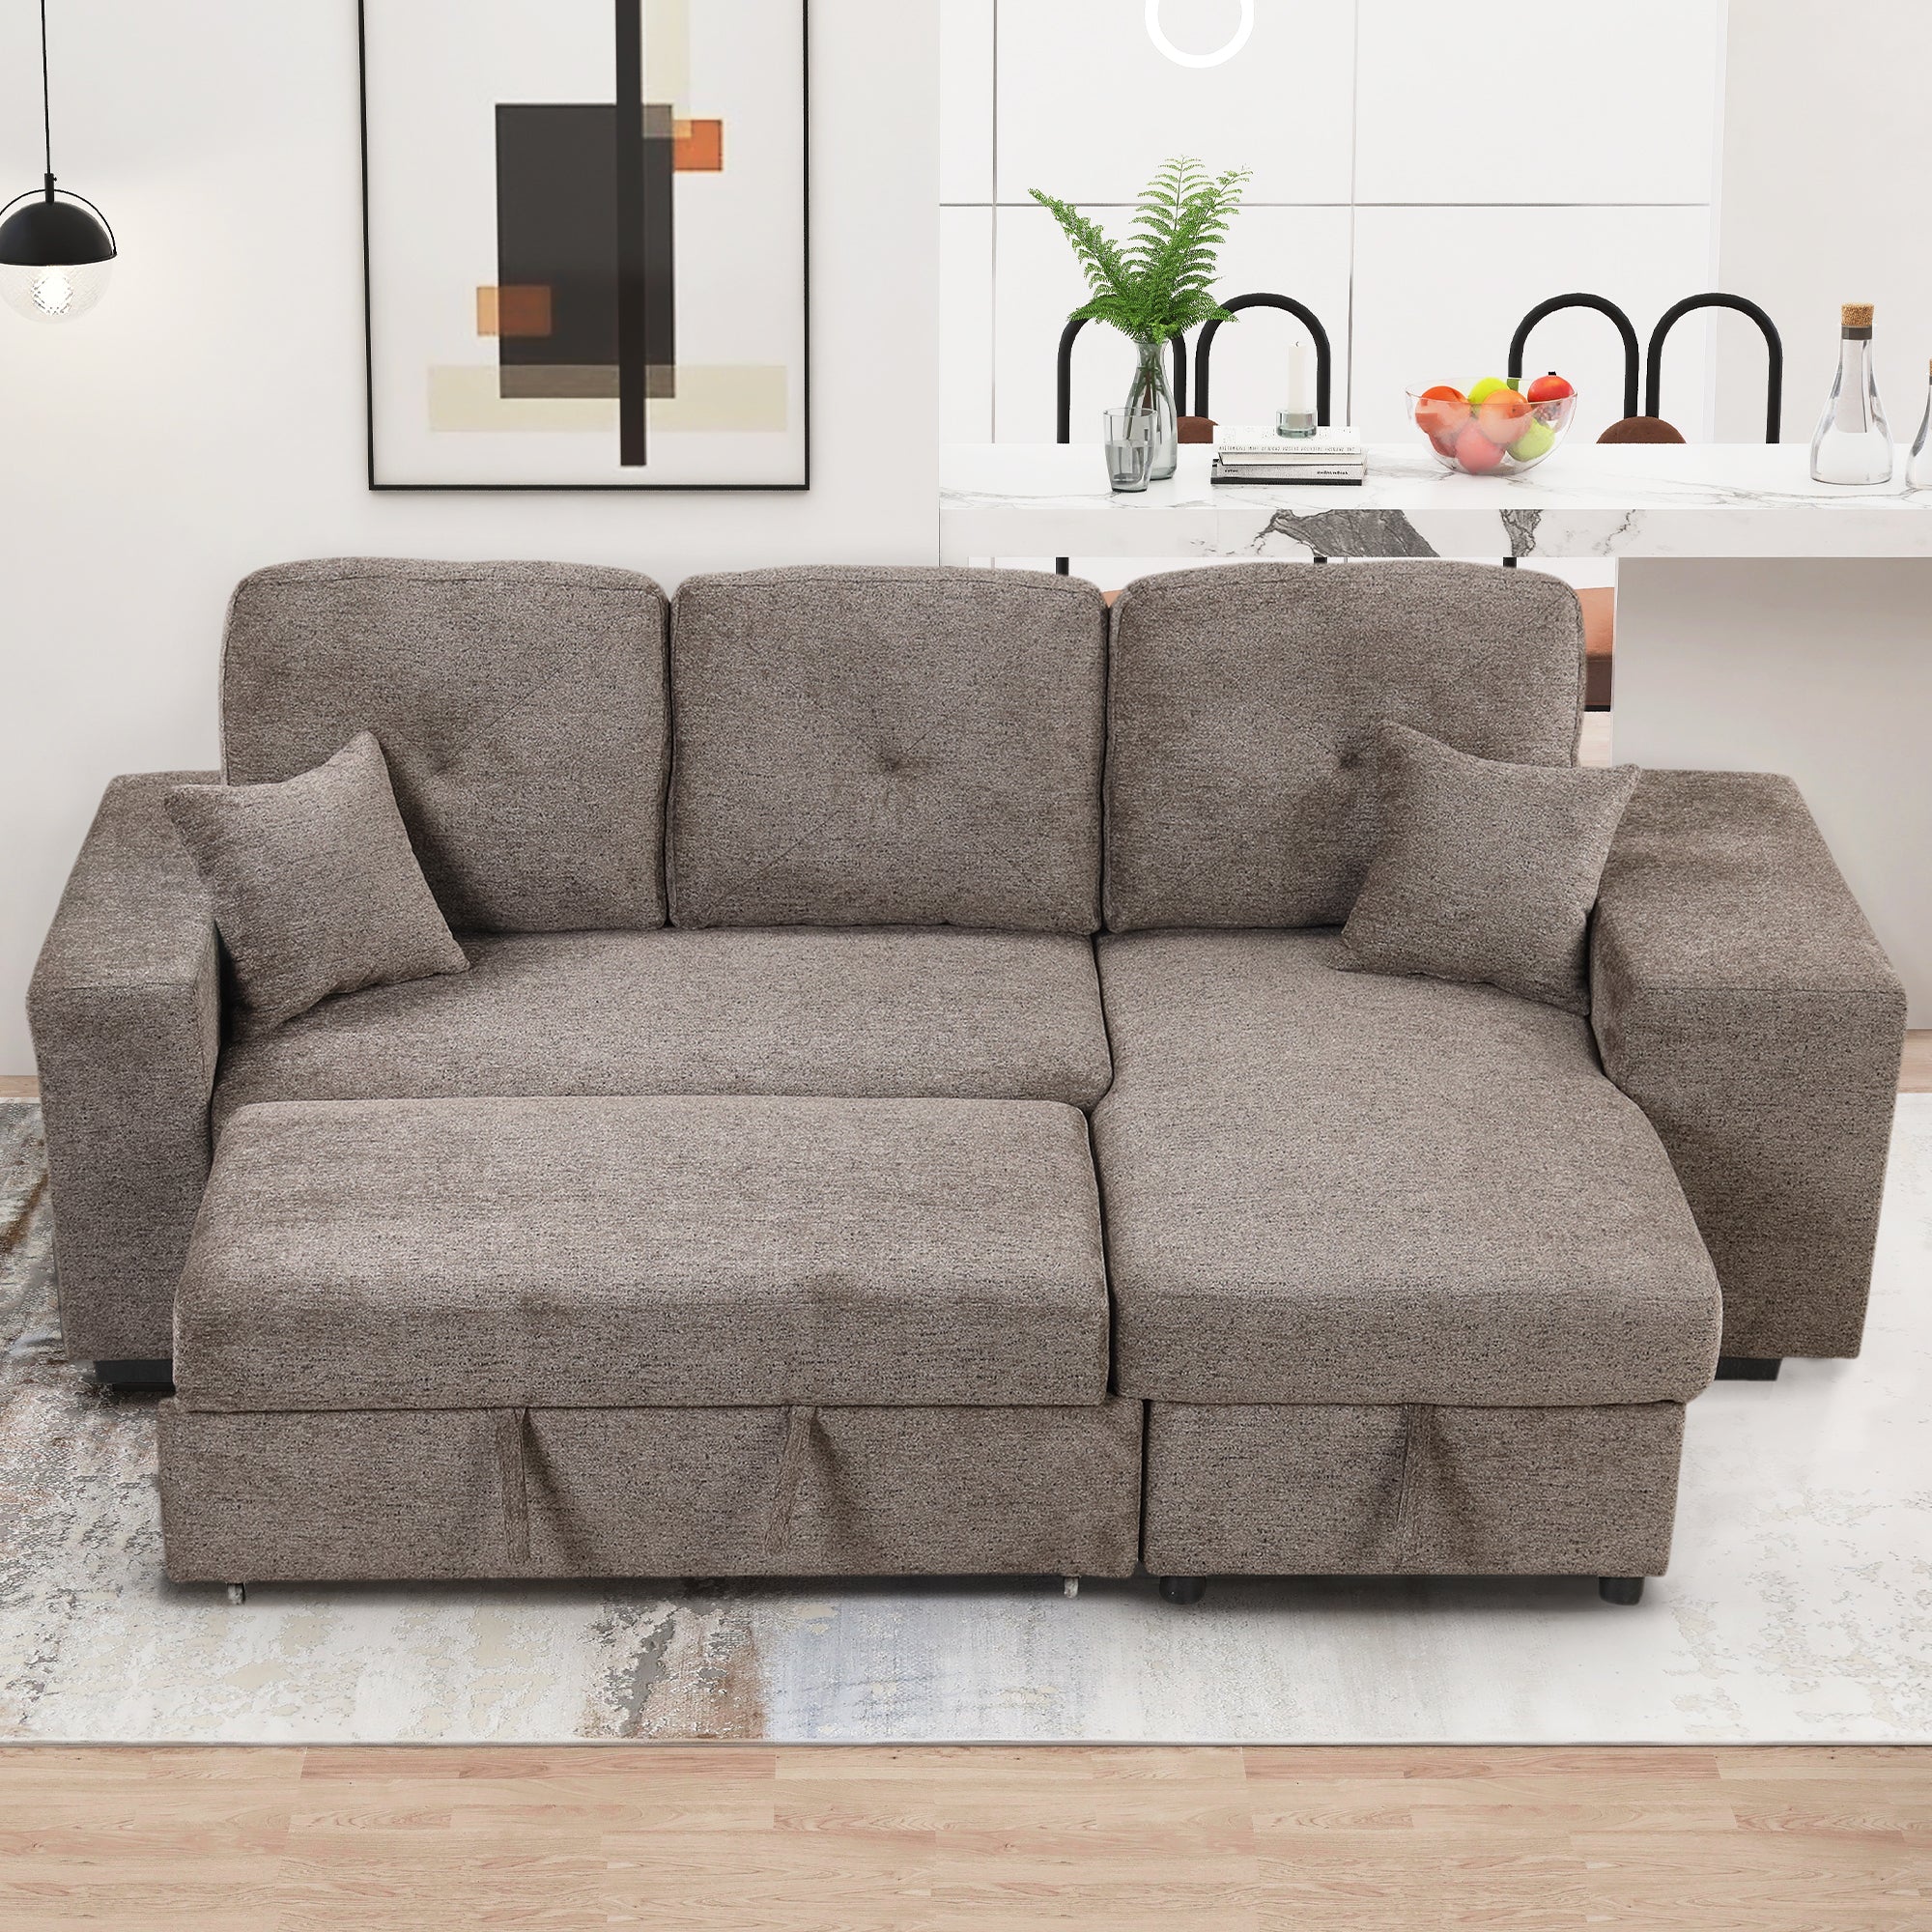 Brown Velvet Reversible Sleeper Sectional Sofa Bed with Storage Chaise & Stools-Sleeper Sectionals-American Furniture Outlet